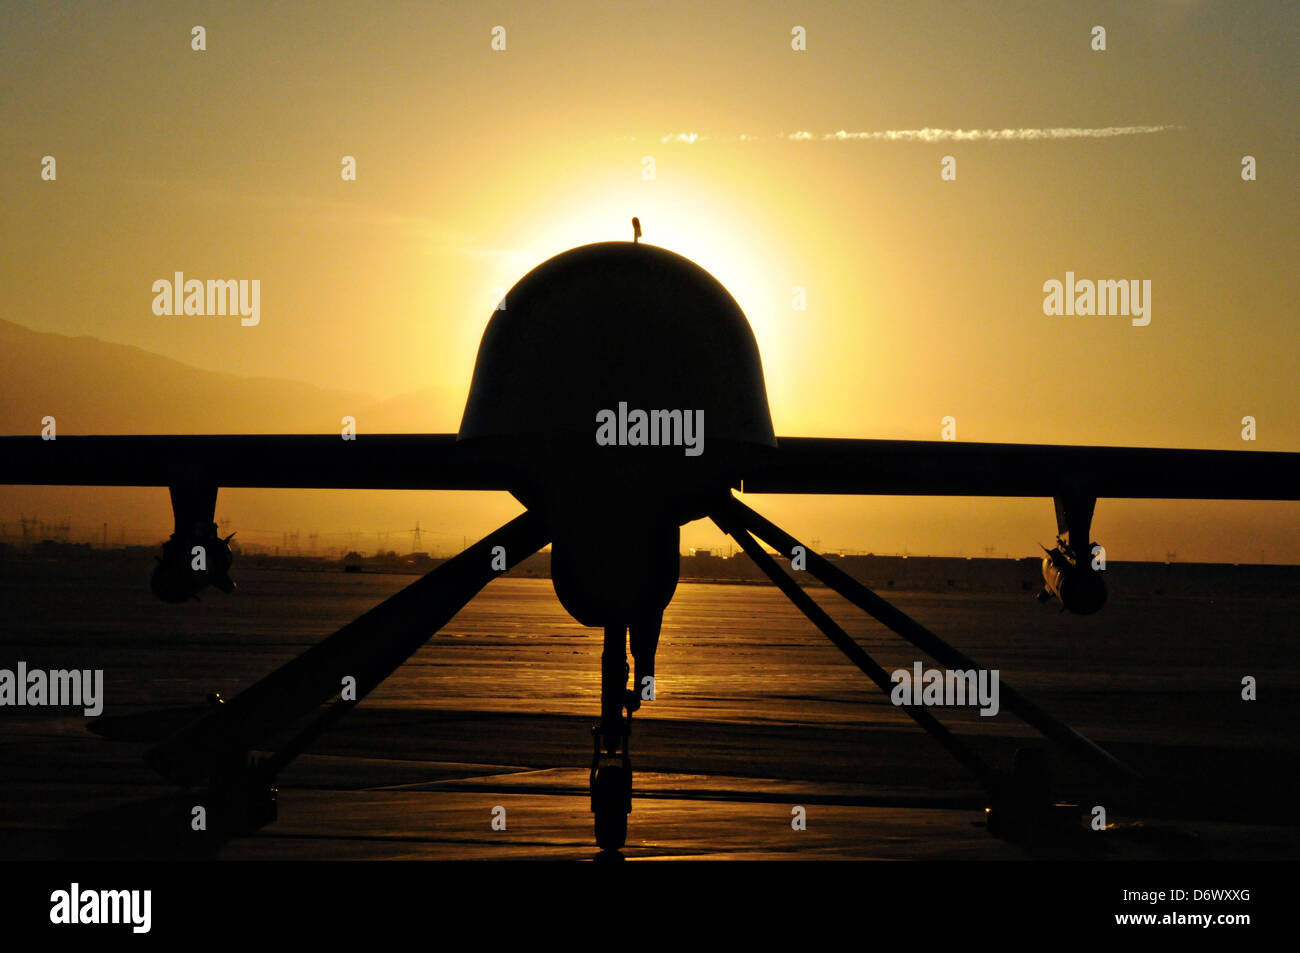 US Air Force MQ-1 Predator unmanned aerial vehicle assigned to the California Air National Guard's 163rd Reconnaissance Wing silhouetted during sunset at the Southern California Logistics Airport January 7, 2012 in Victorville, CA. Stock Photo